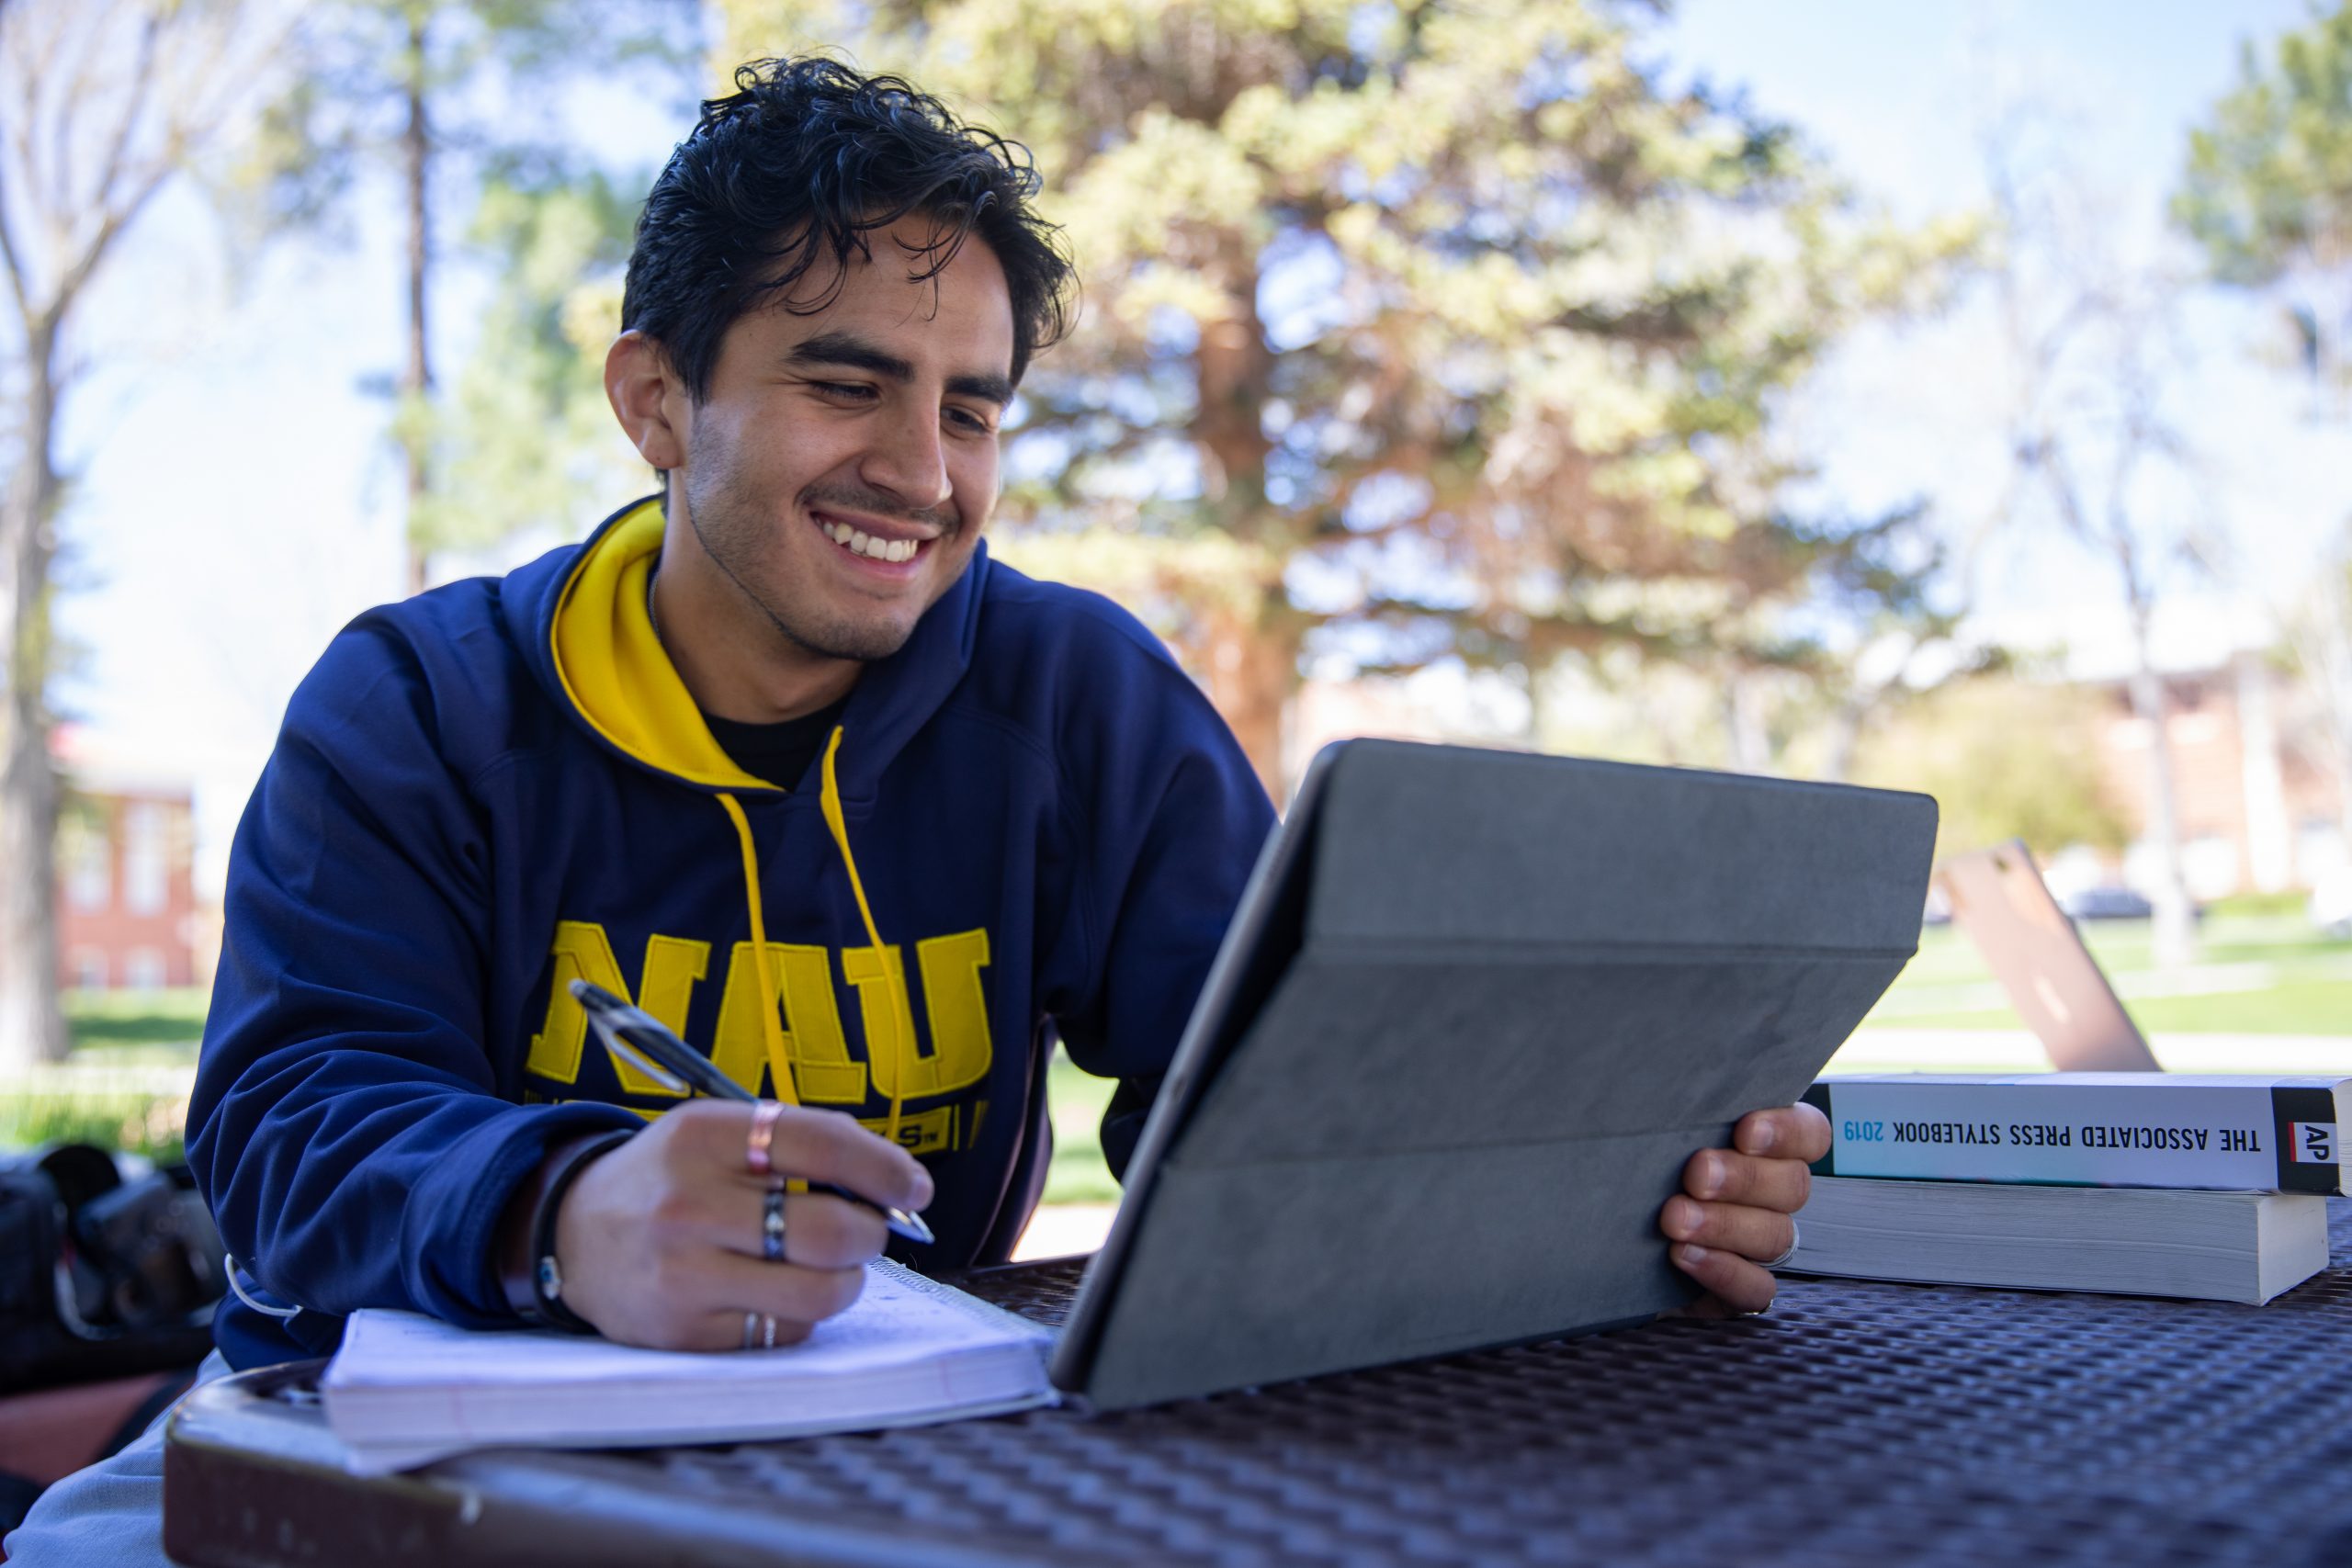 Student smiling while doing homework.